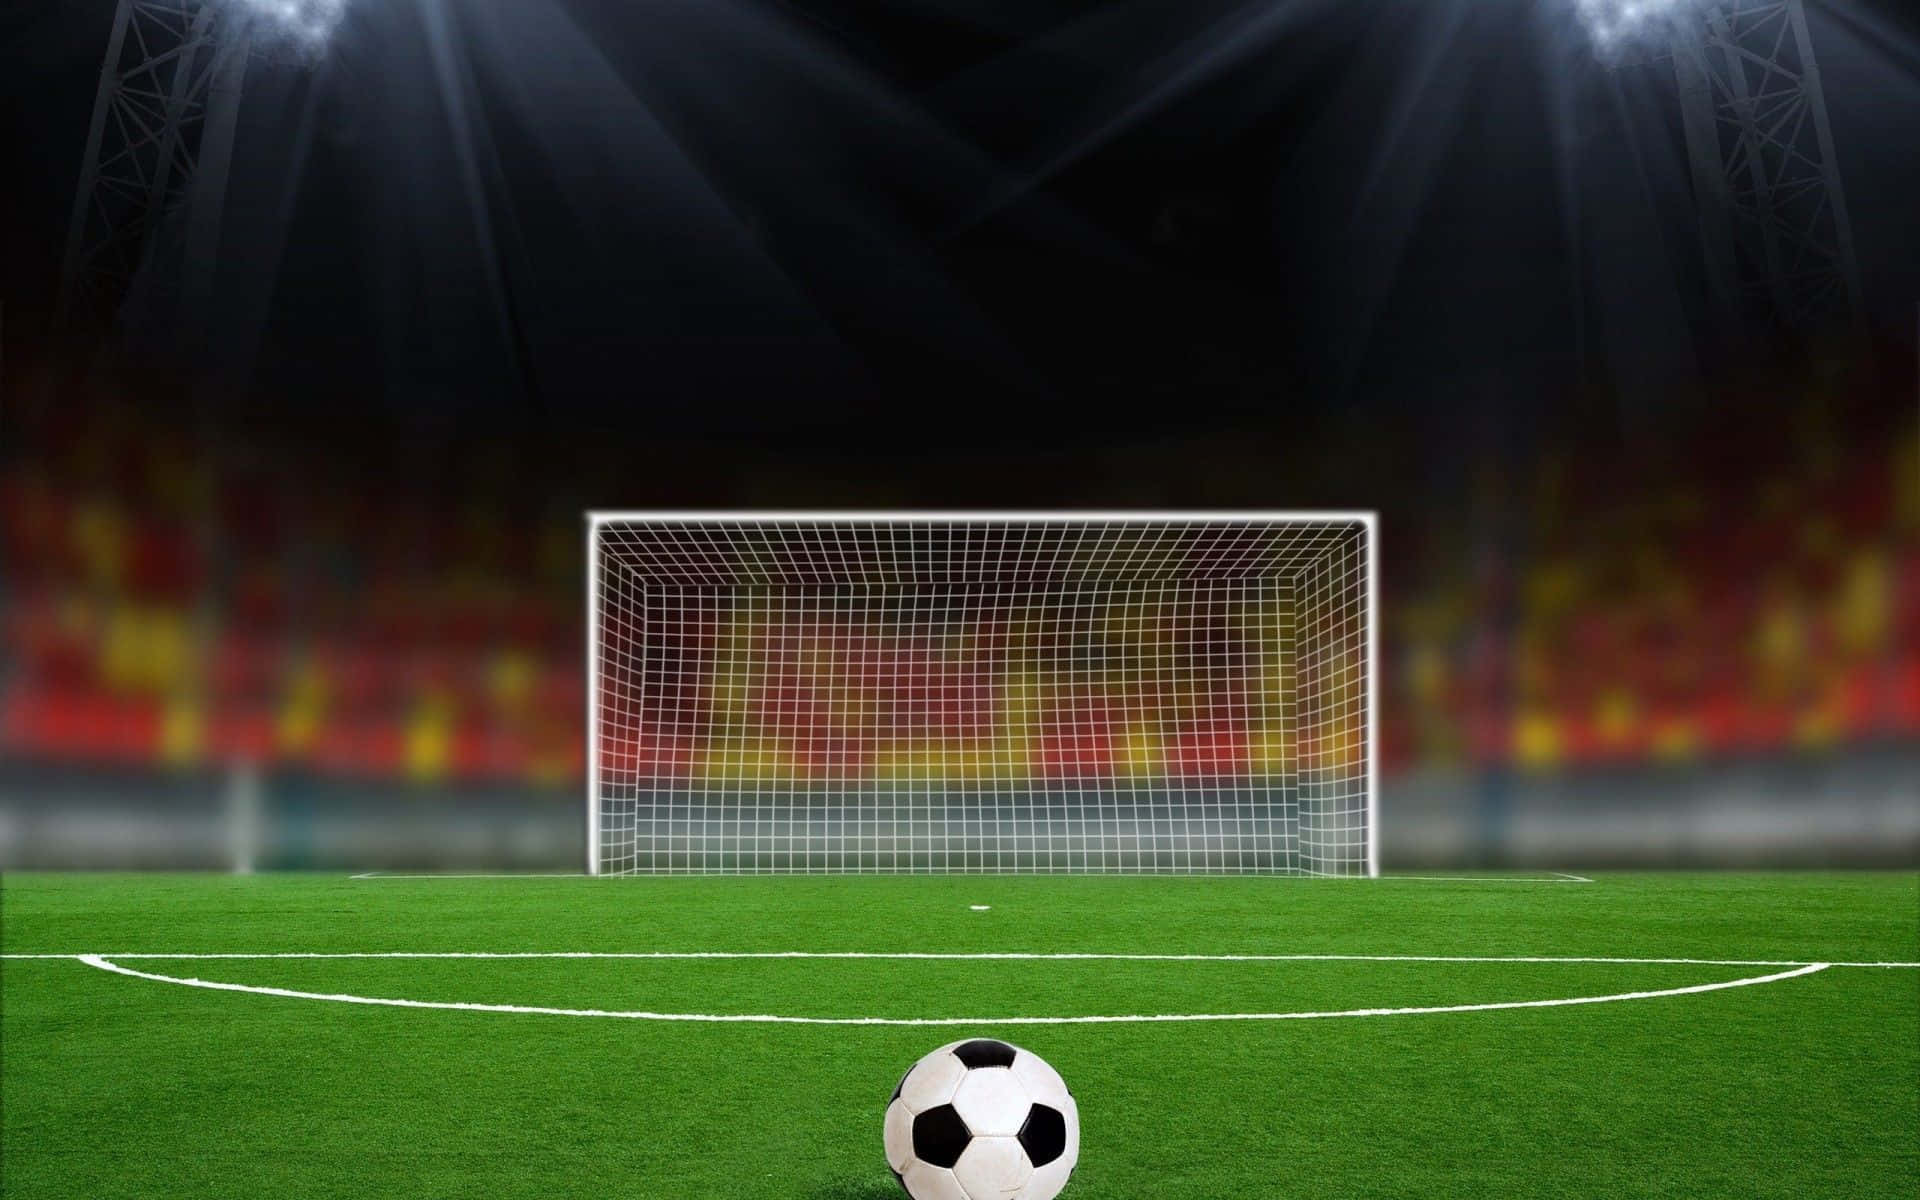 Perspective Of Soccer Ball In Football Field Picture